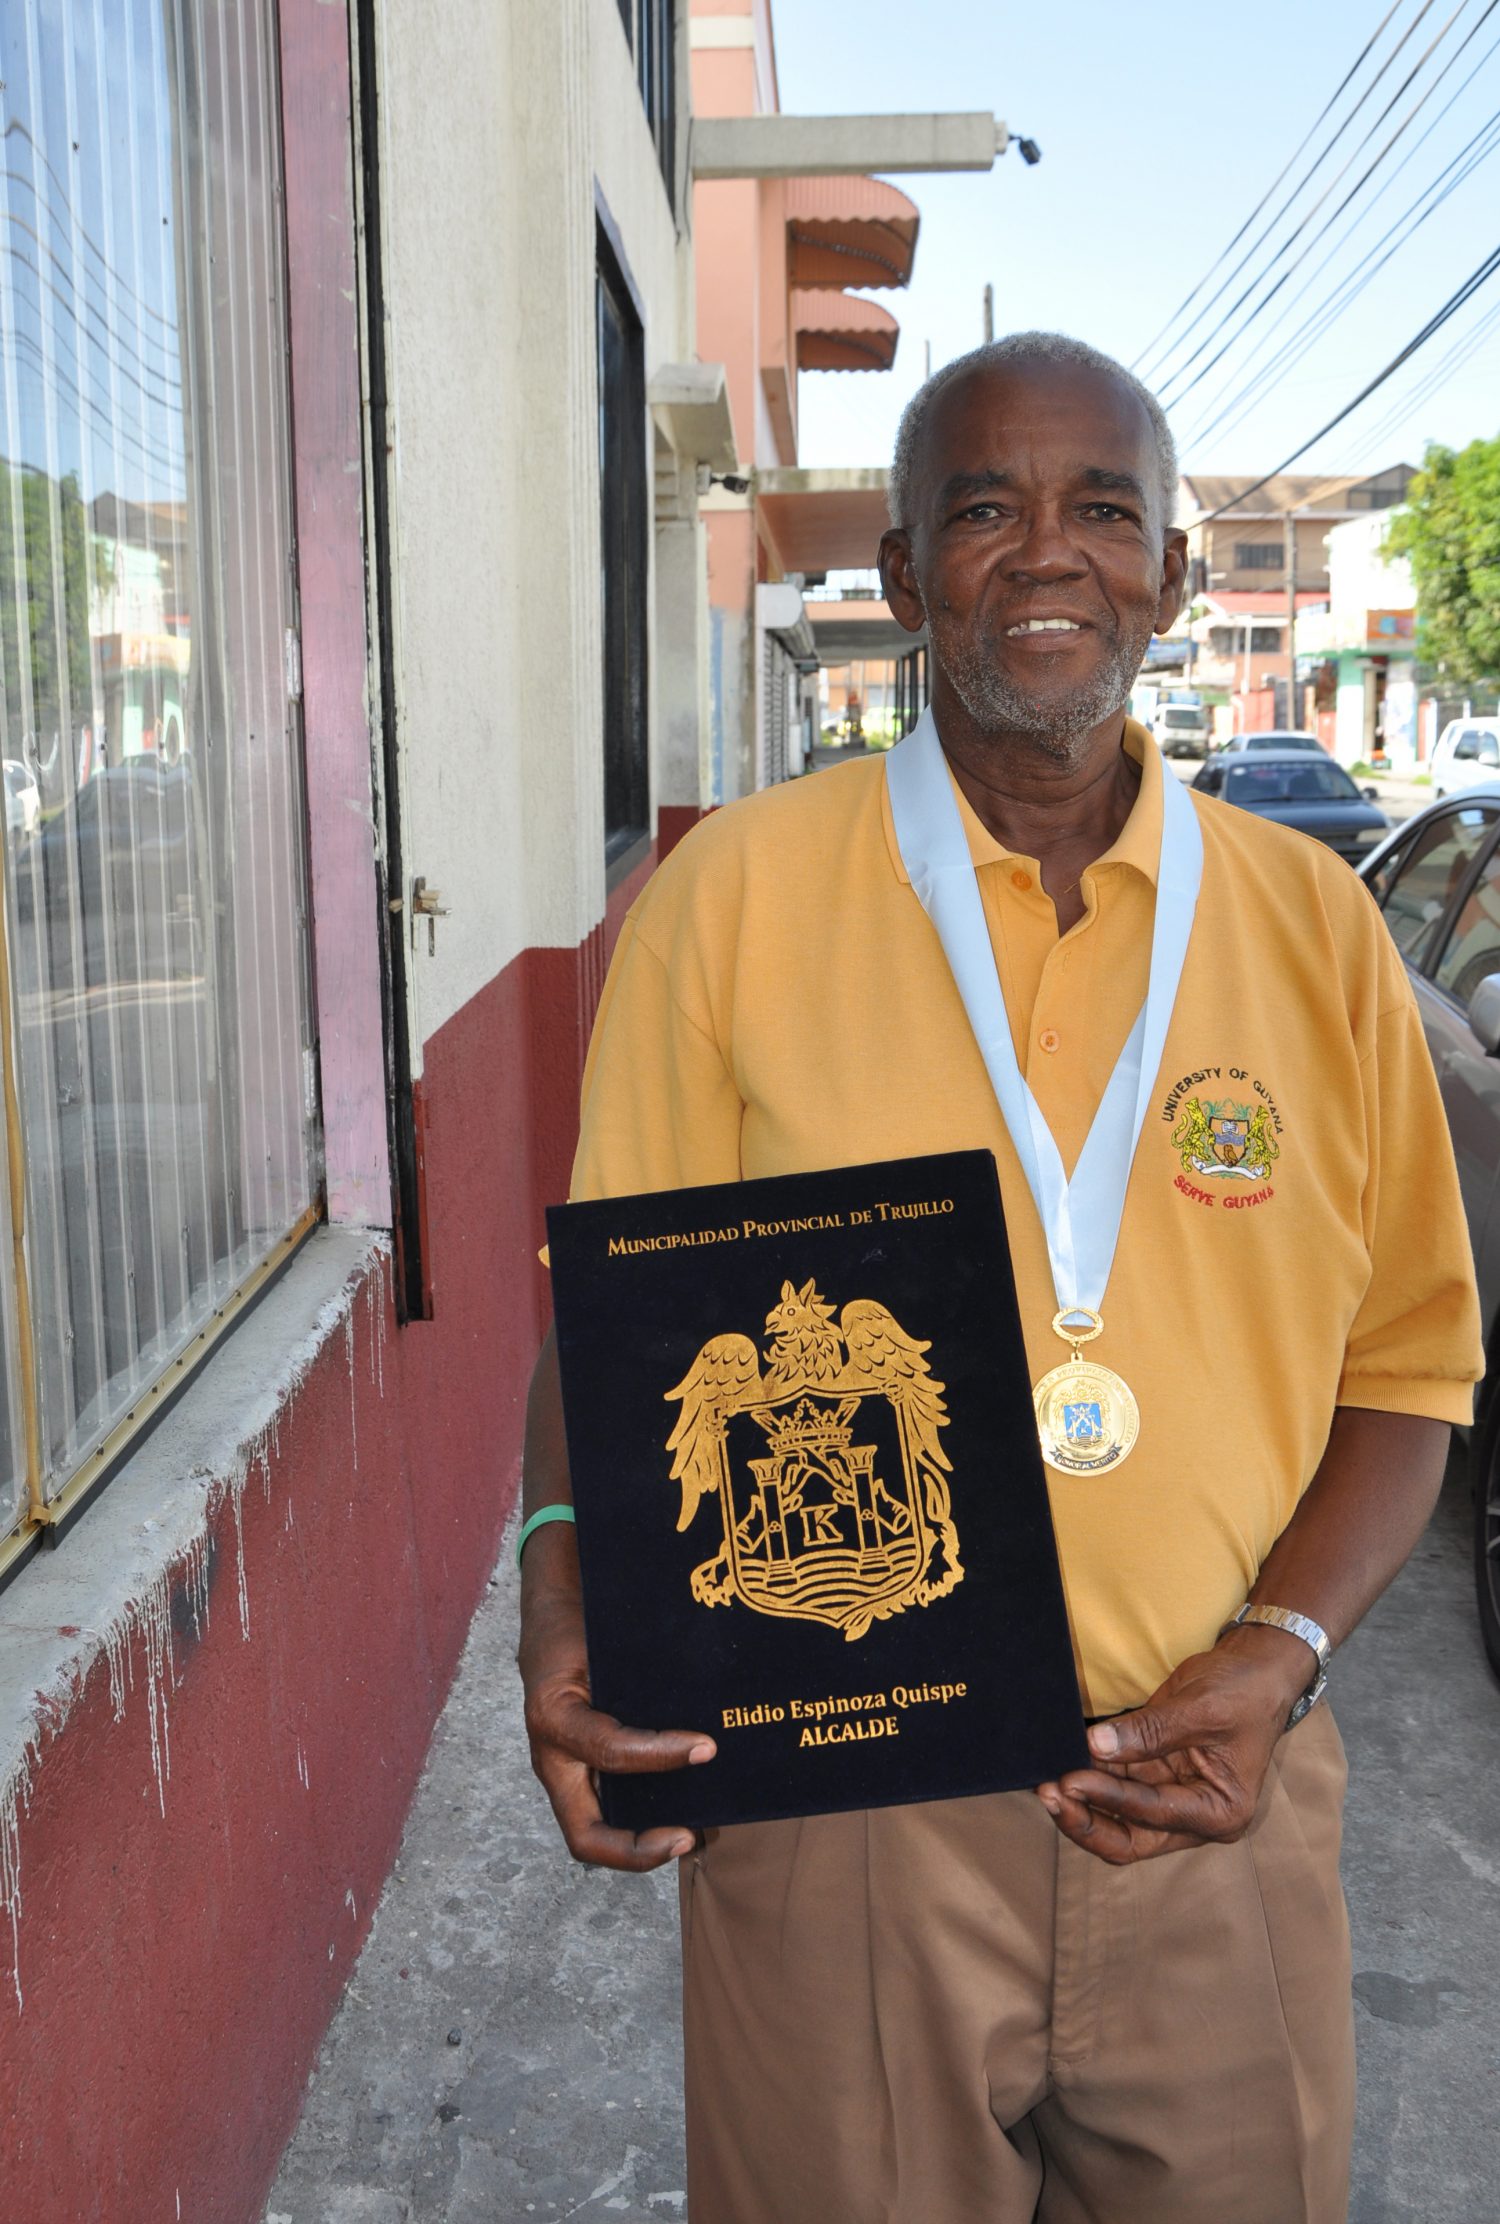 Blackmore receives medal, Diploma of Honour from Trujillo Municipality